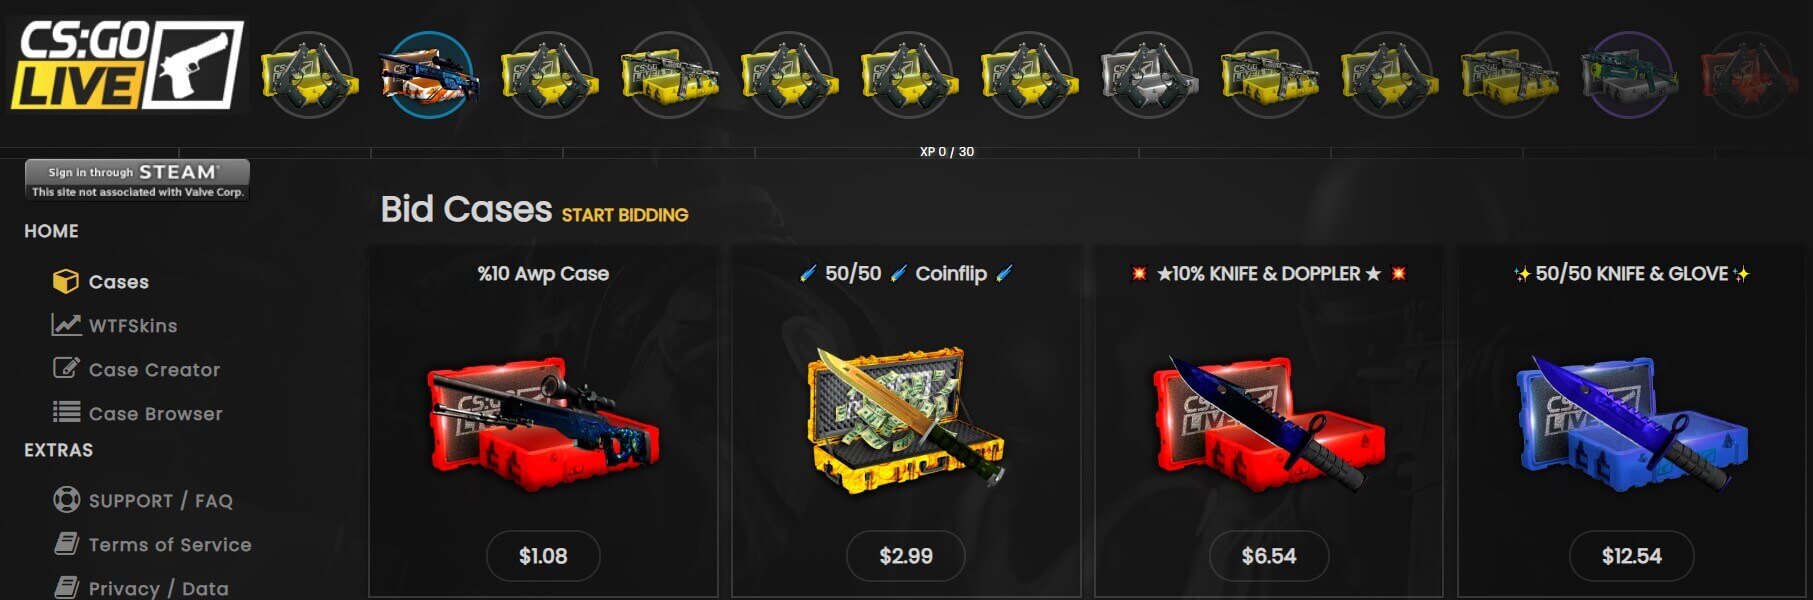 csgolive cases opening